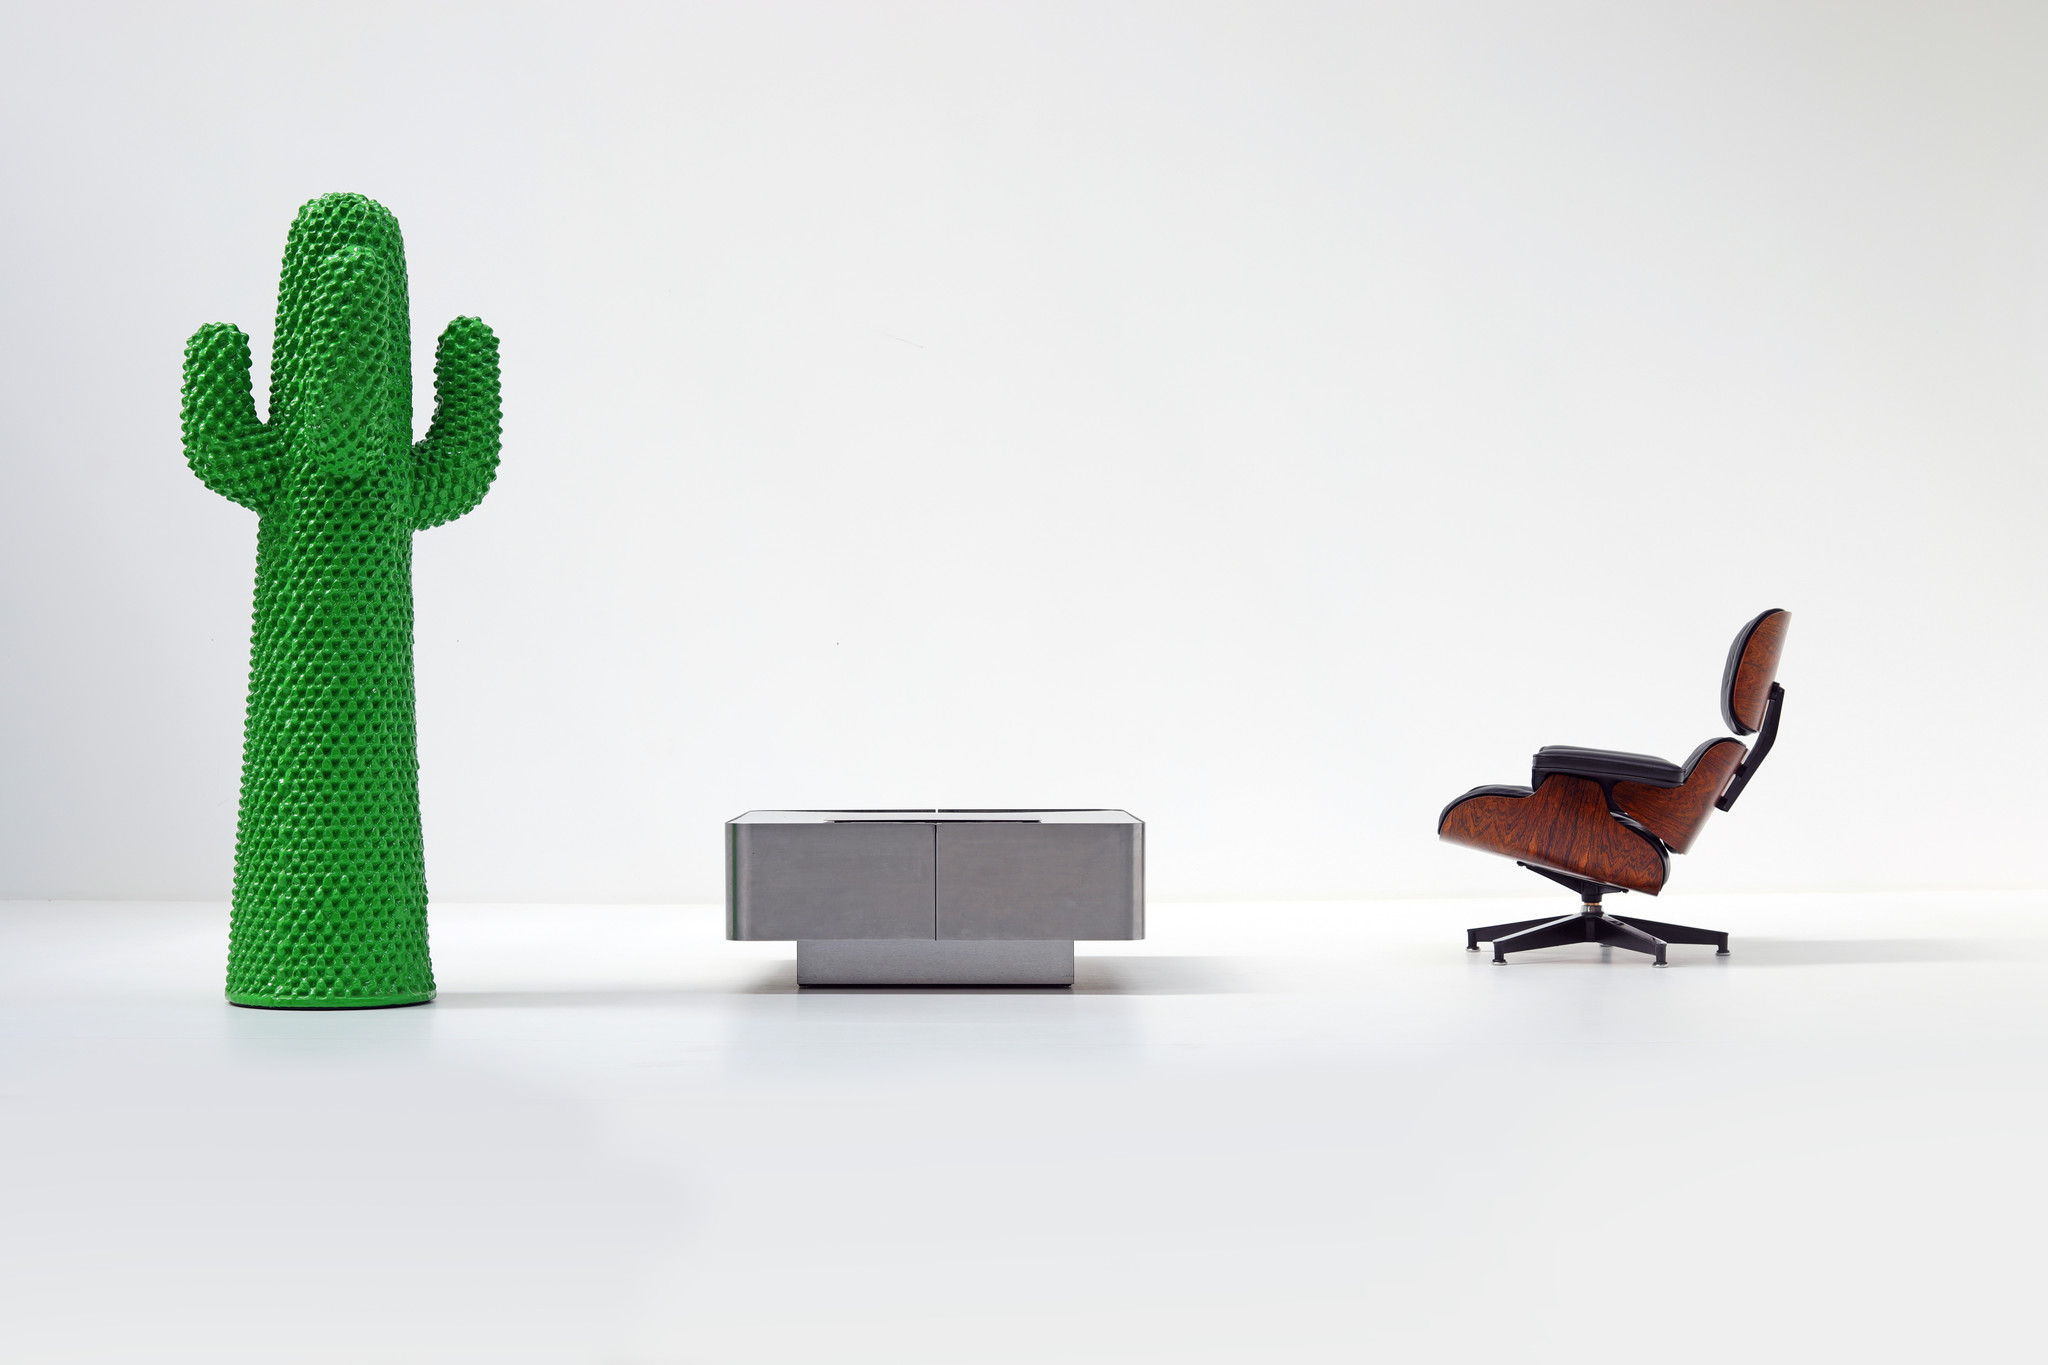 GUFRAM "Another Green" CACTUS BY GUIDO DROCCO AND FRANCO MELLO, 1986